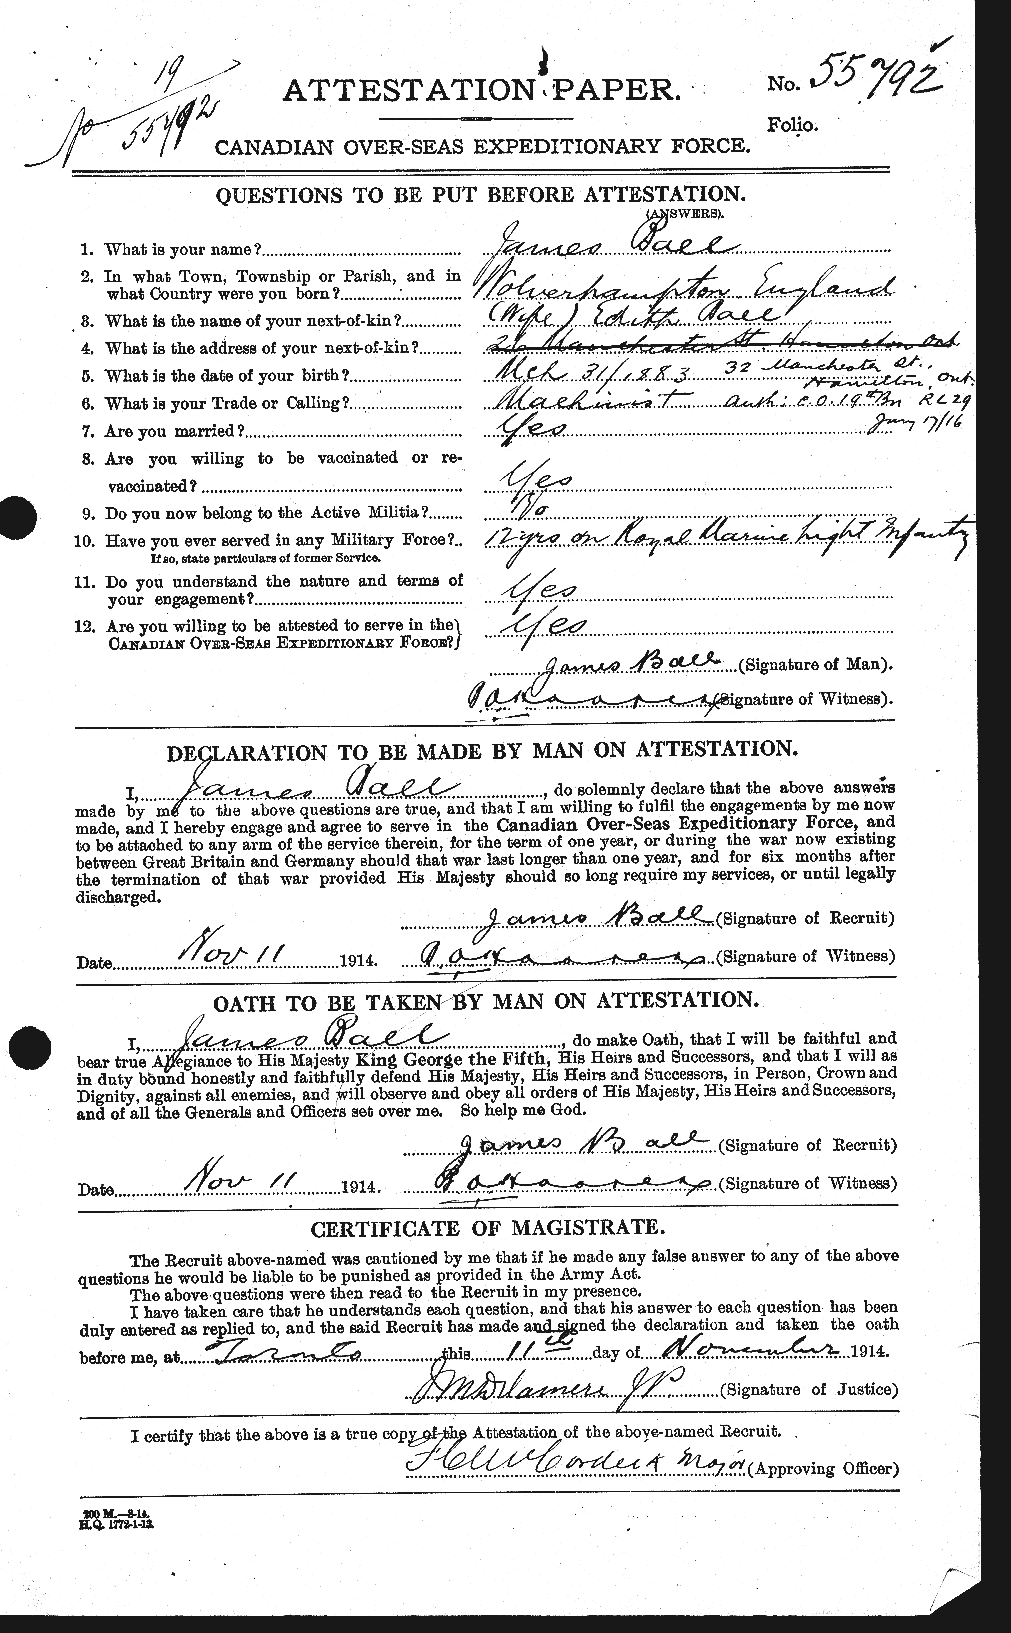 Personnel Records of the First World War - CEF 225701a